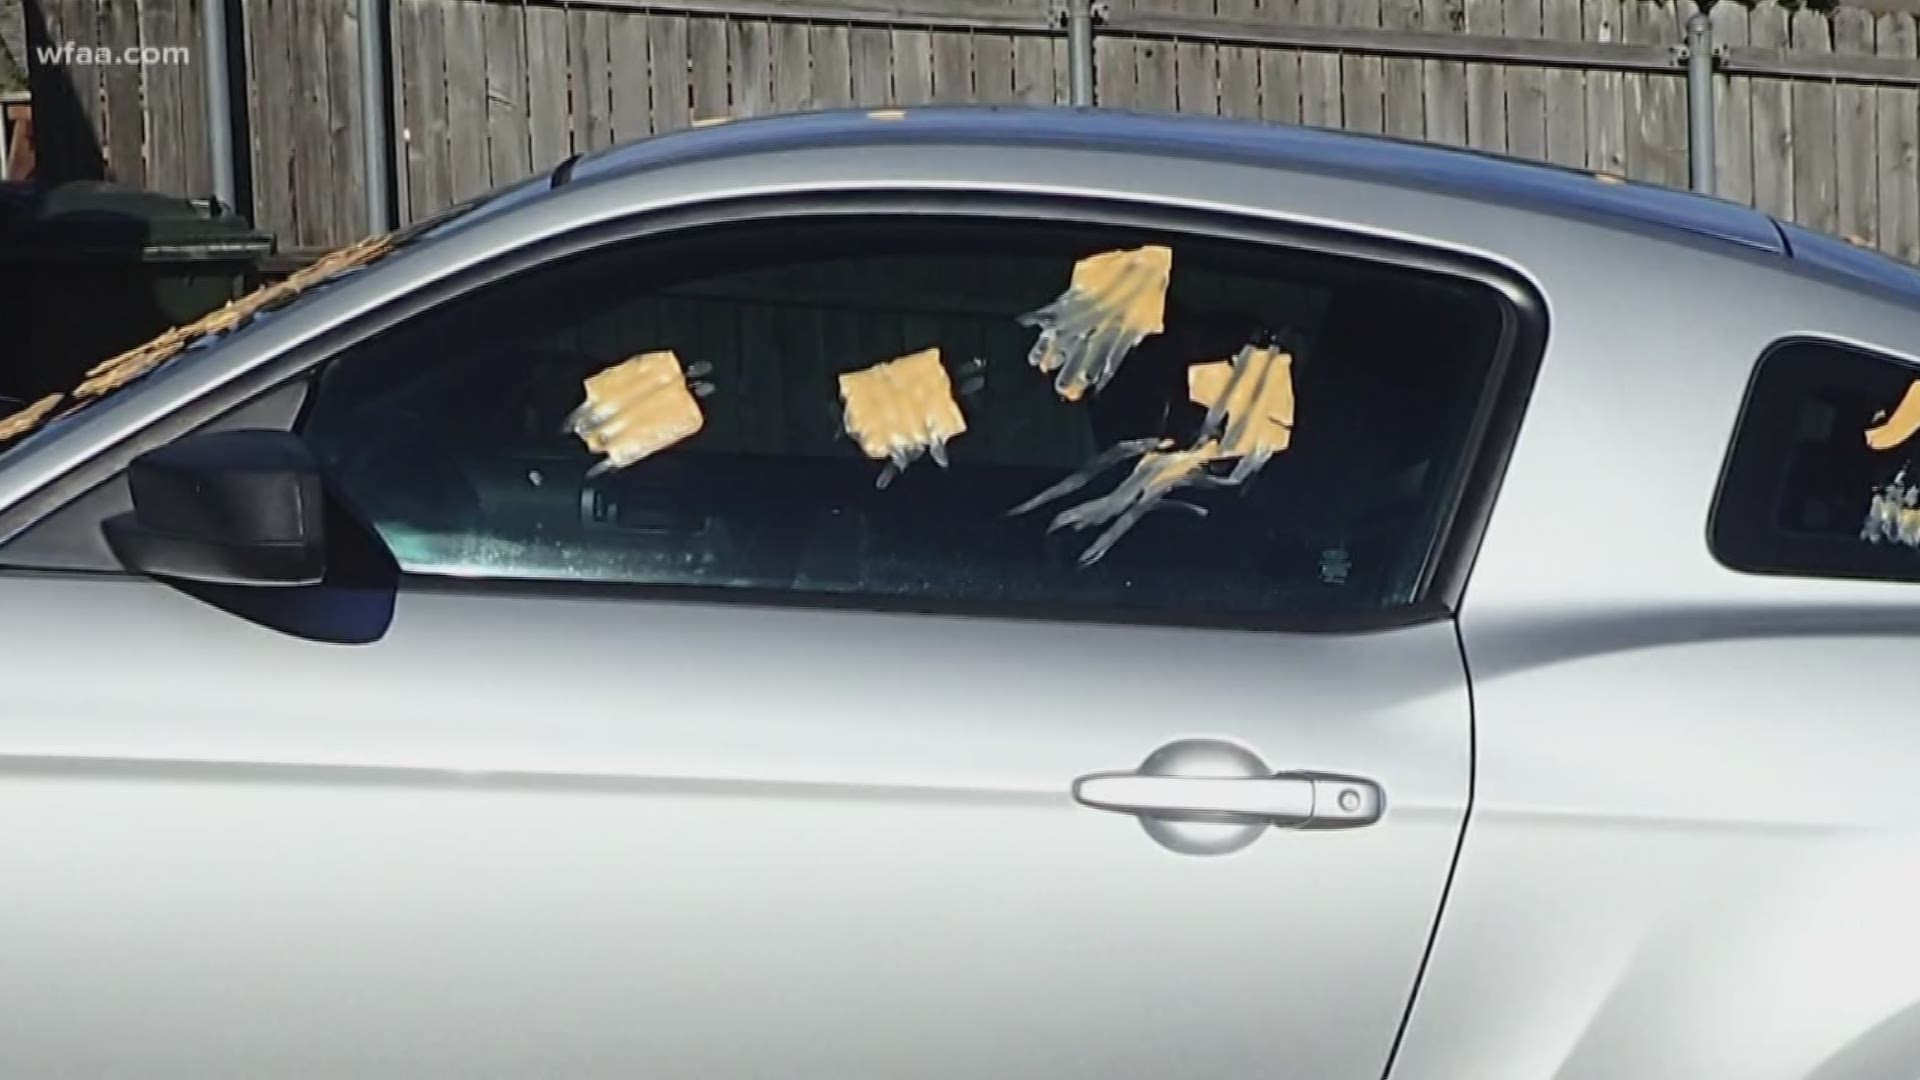 There's a new prank going around called #TheCheeseChallenge. Now detectives are looking for the pranksters responsible for targeting vehicles in Carrollton.